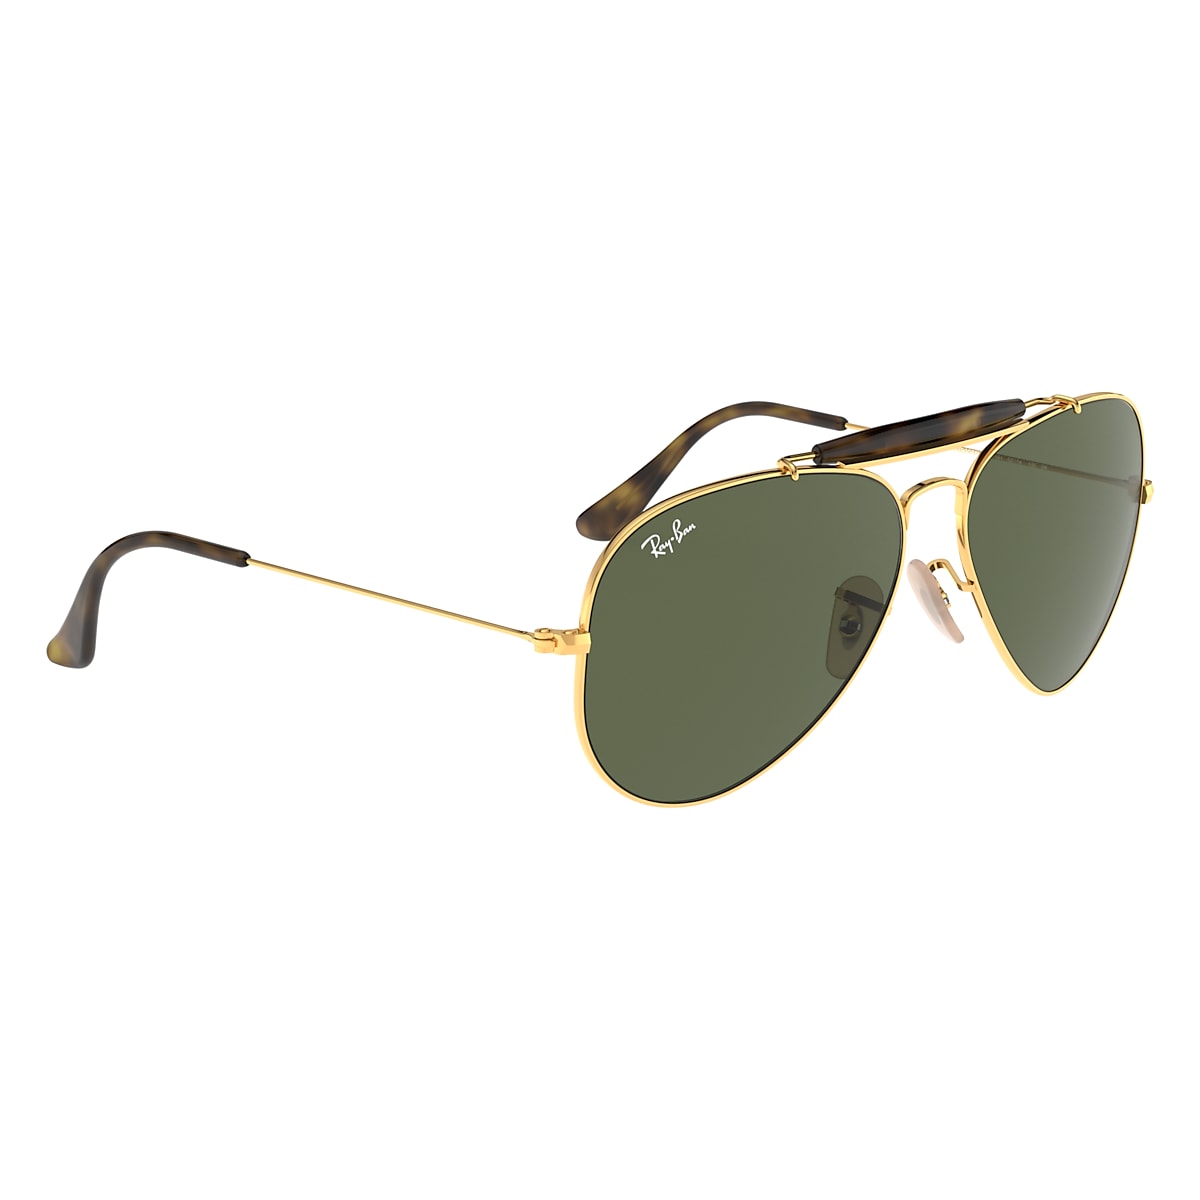 OUTDOORSMAN Sunglasses COLLECTION - HAVANA Ray-Ban® Gold RB3029 and | in Green US